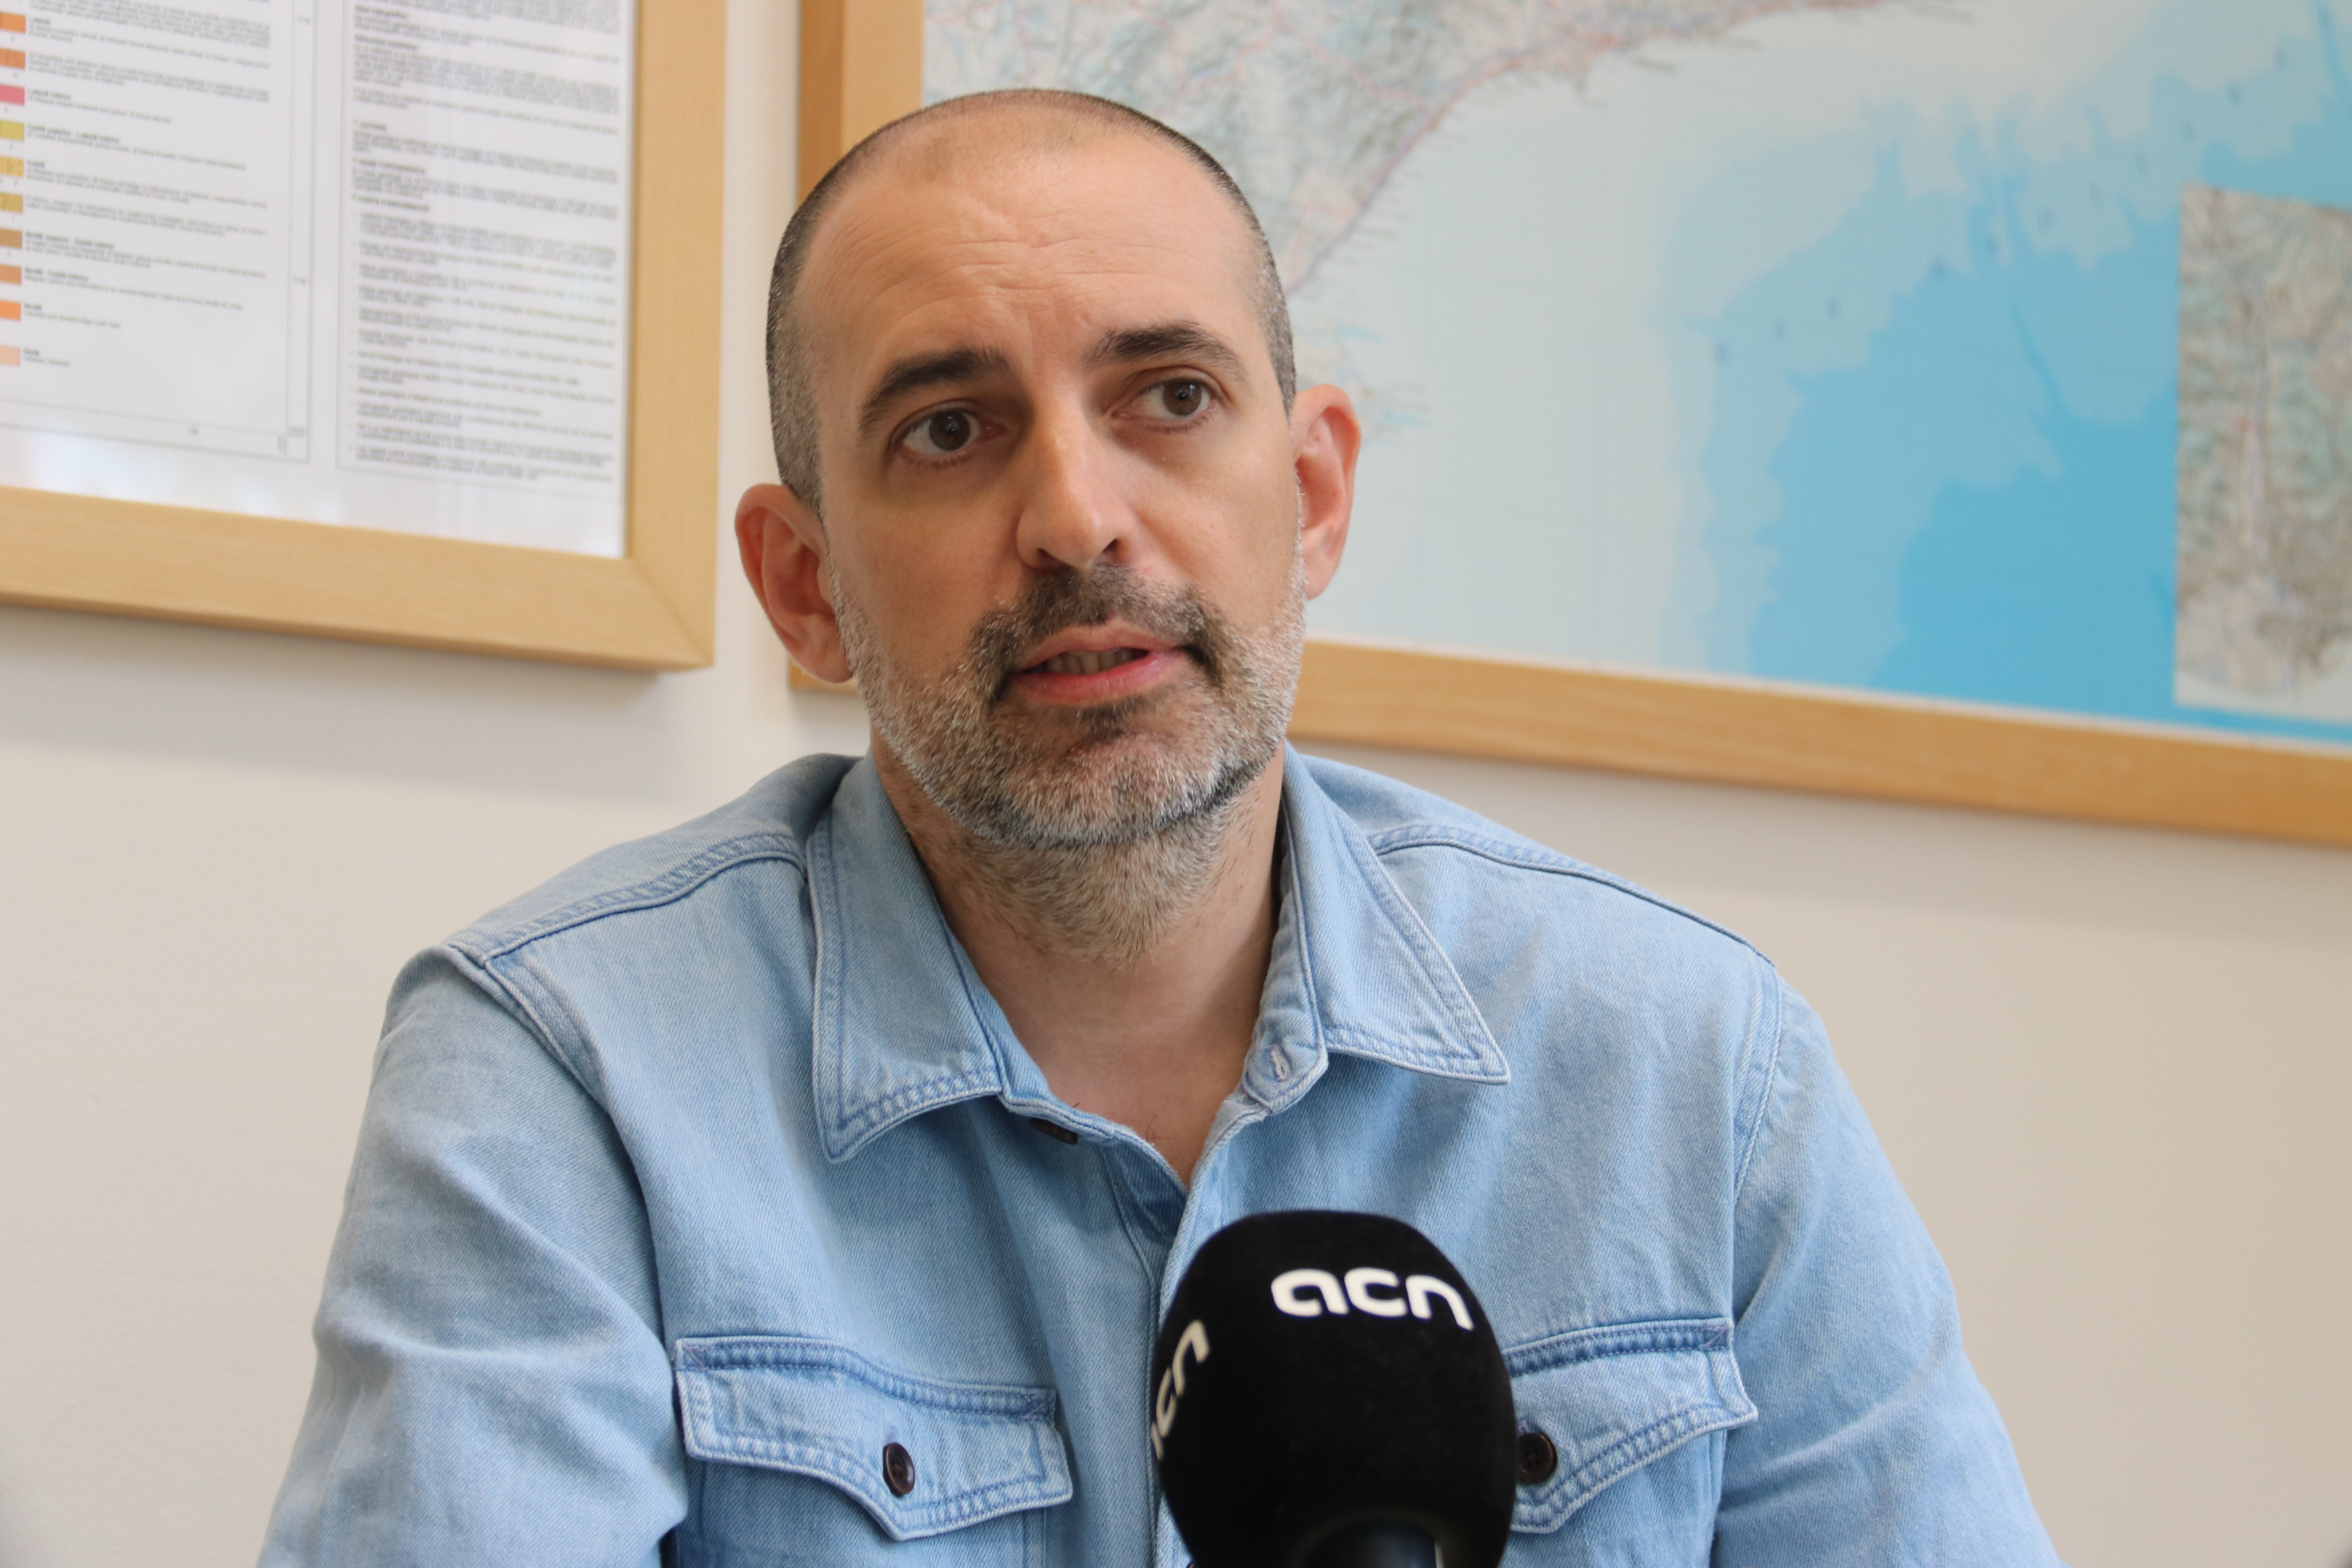 Jordi Pinyol in an interview with the Catalan News Agency